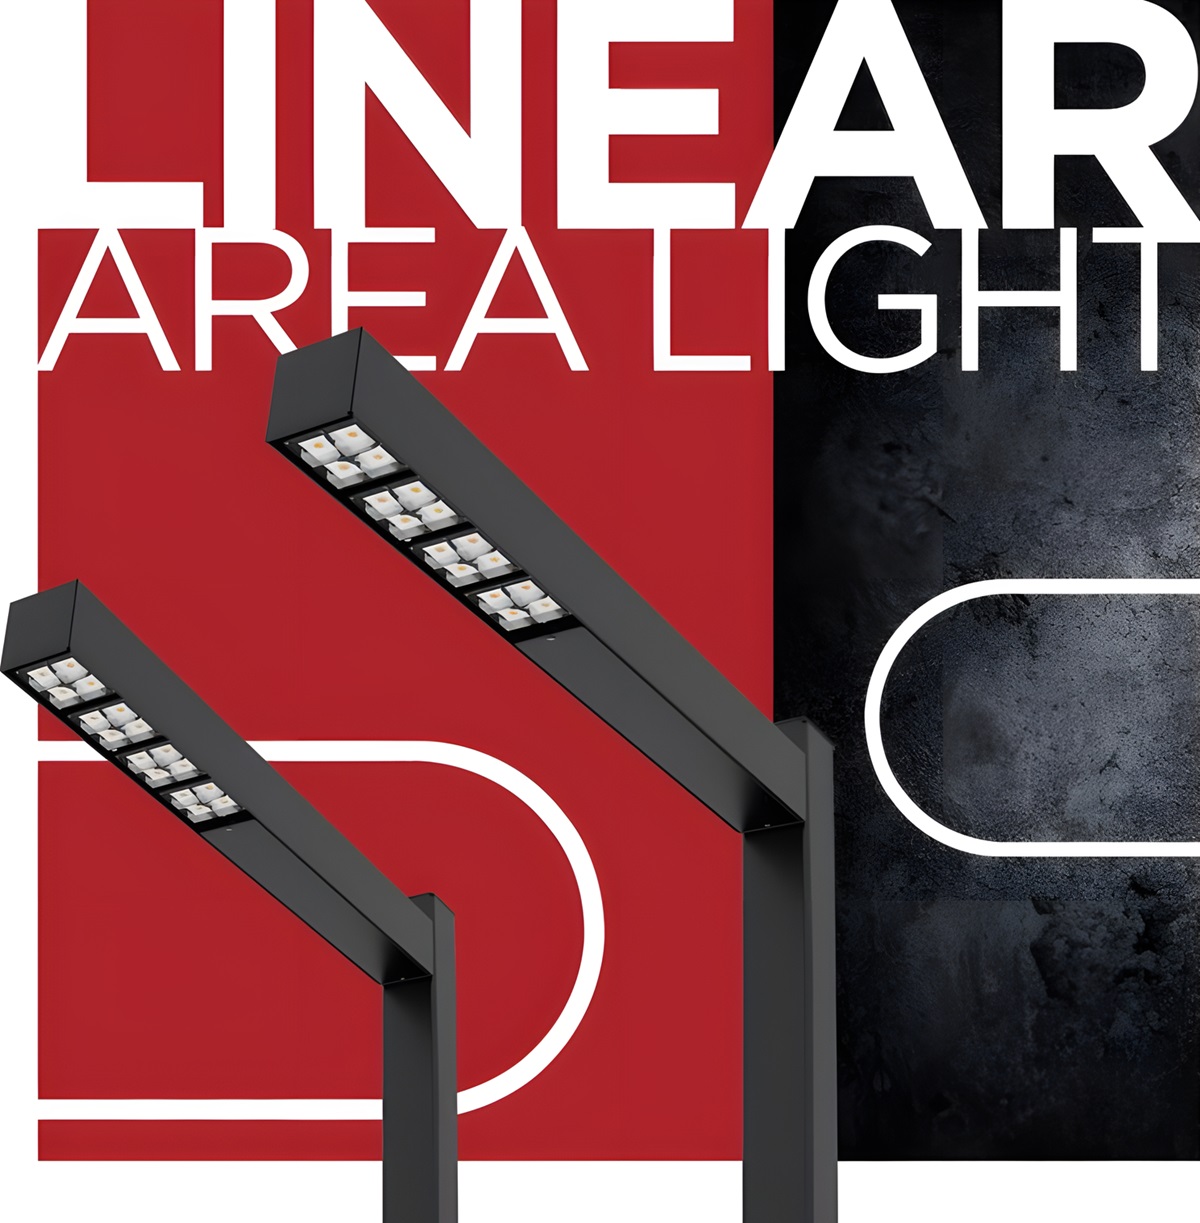 LSI Industries Introduces Linear Area Light for Pedestrian and Parking Applications